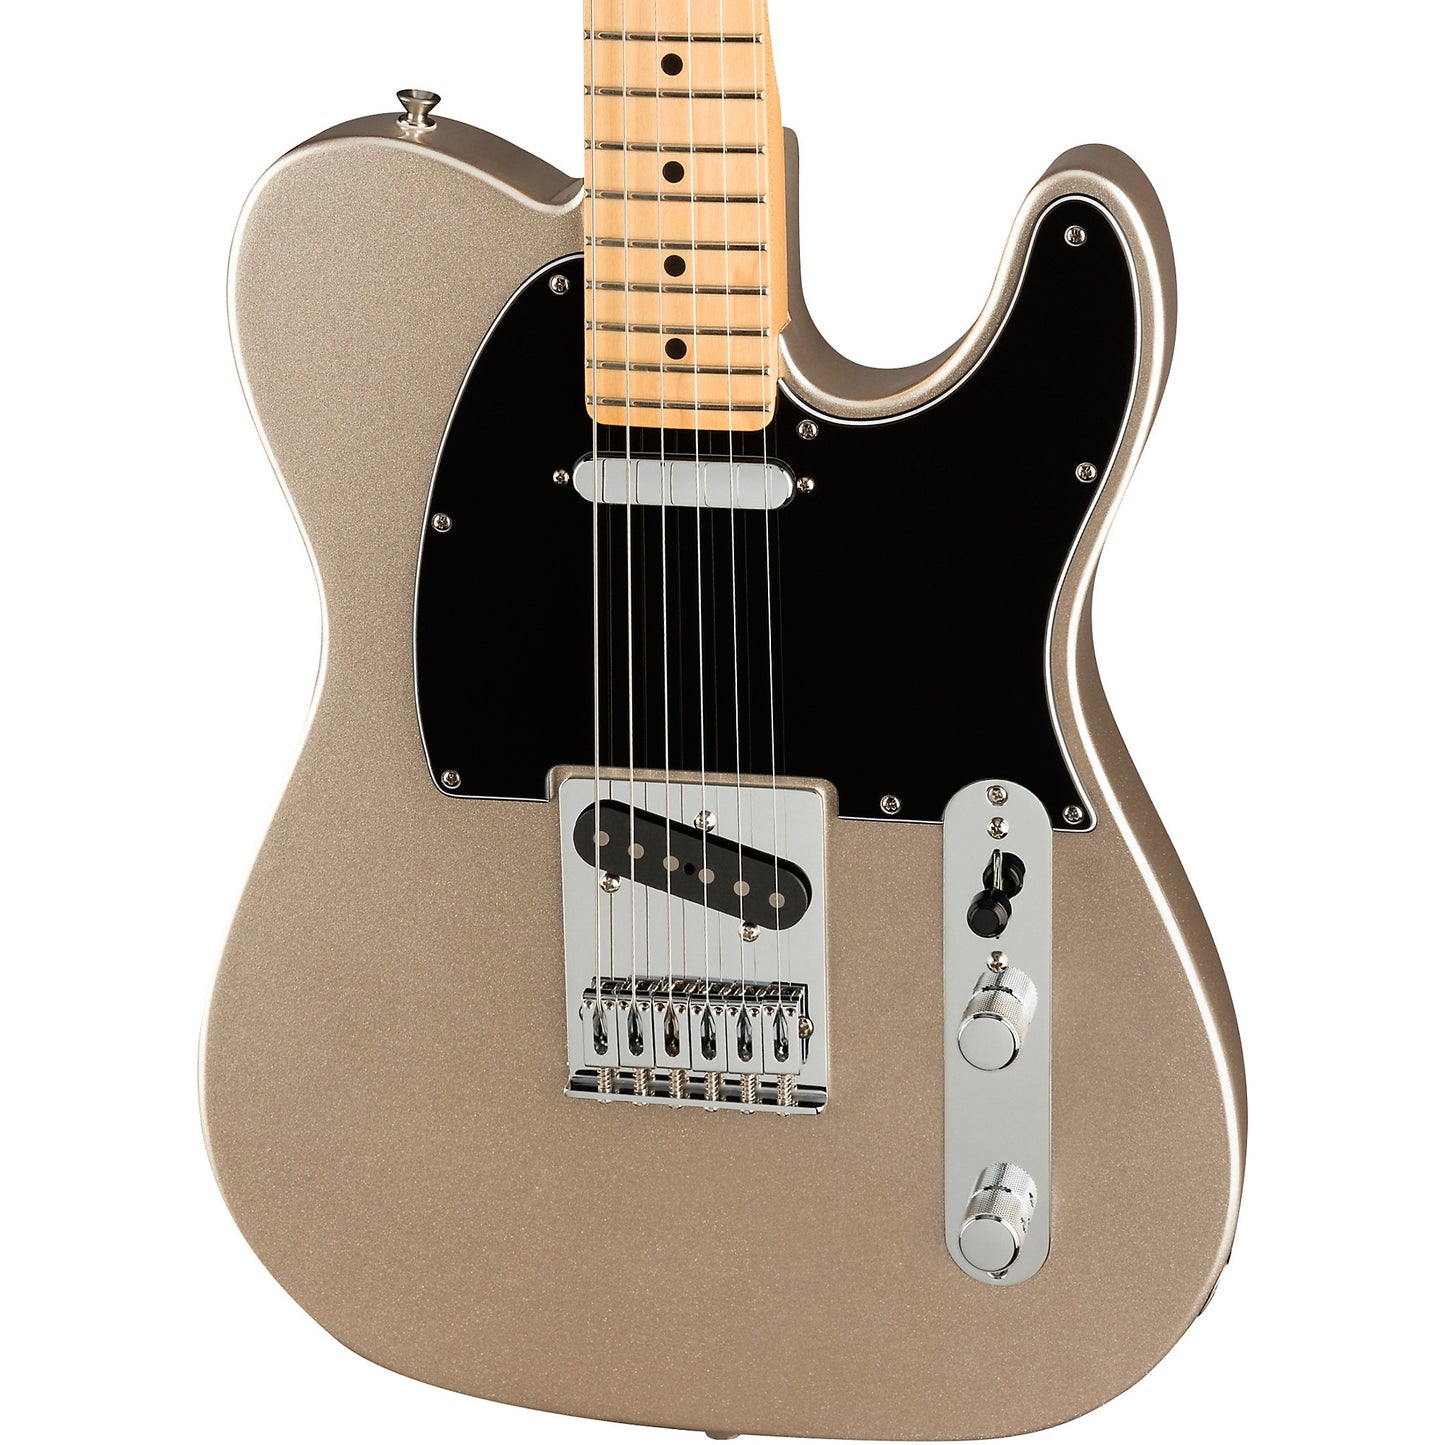 Fender 75th Anniversary Telecaster Diamond Finish Electric Guitar SS with Vintage Style 50's Pickups, Alder Body, Deluxe Gig Bag